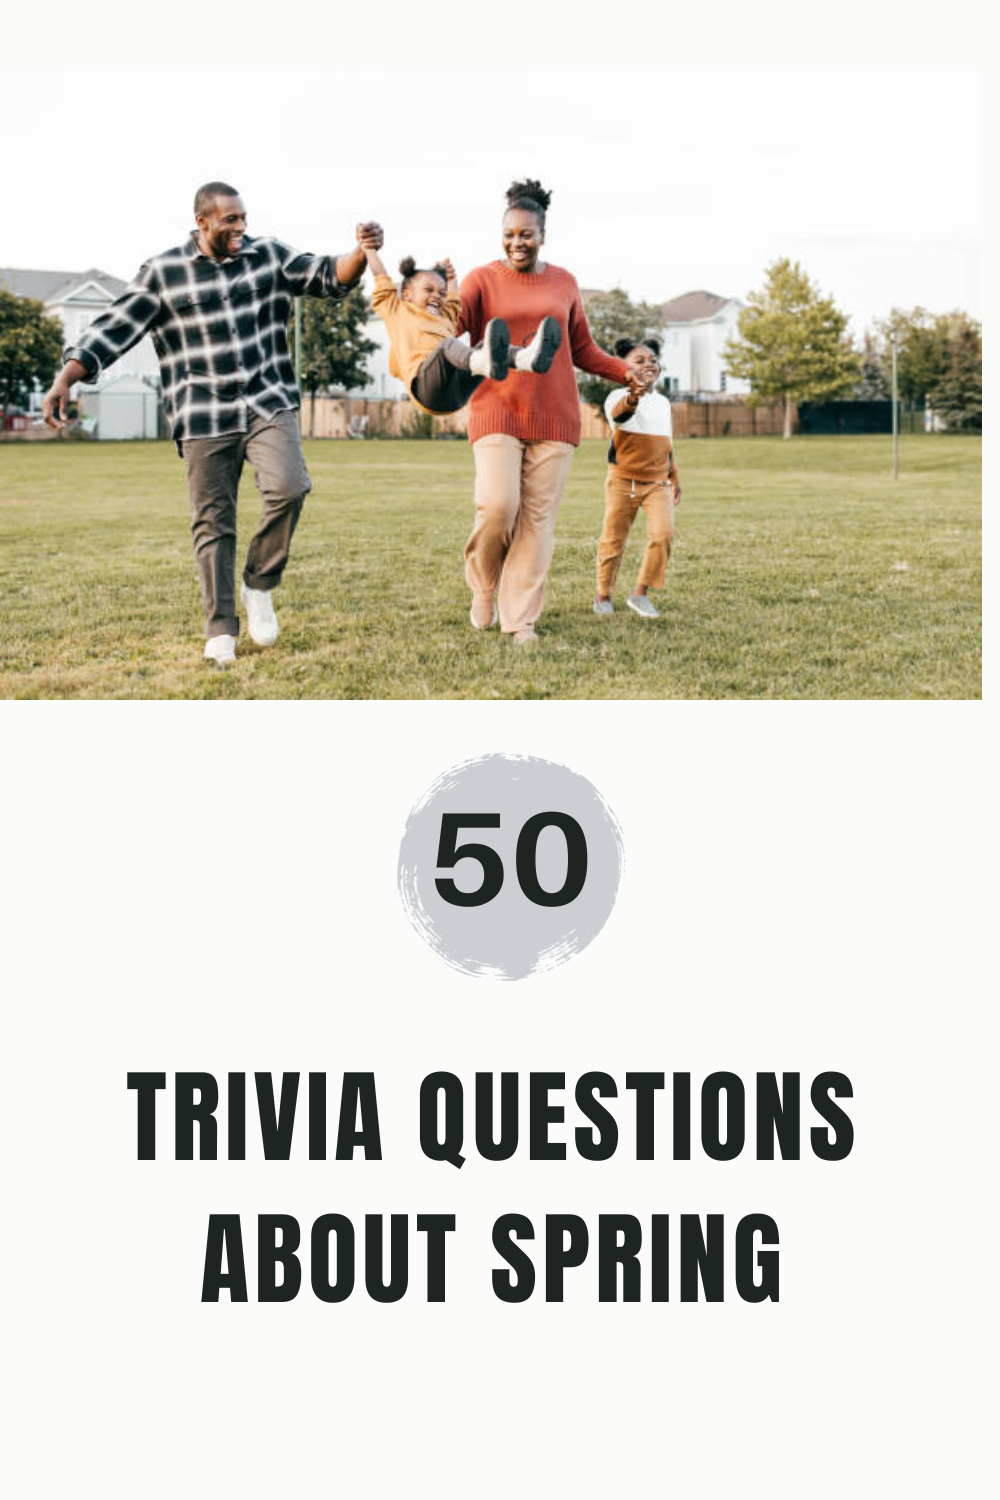 Trivia Questions About Spring